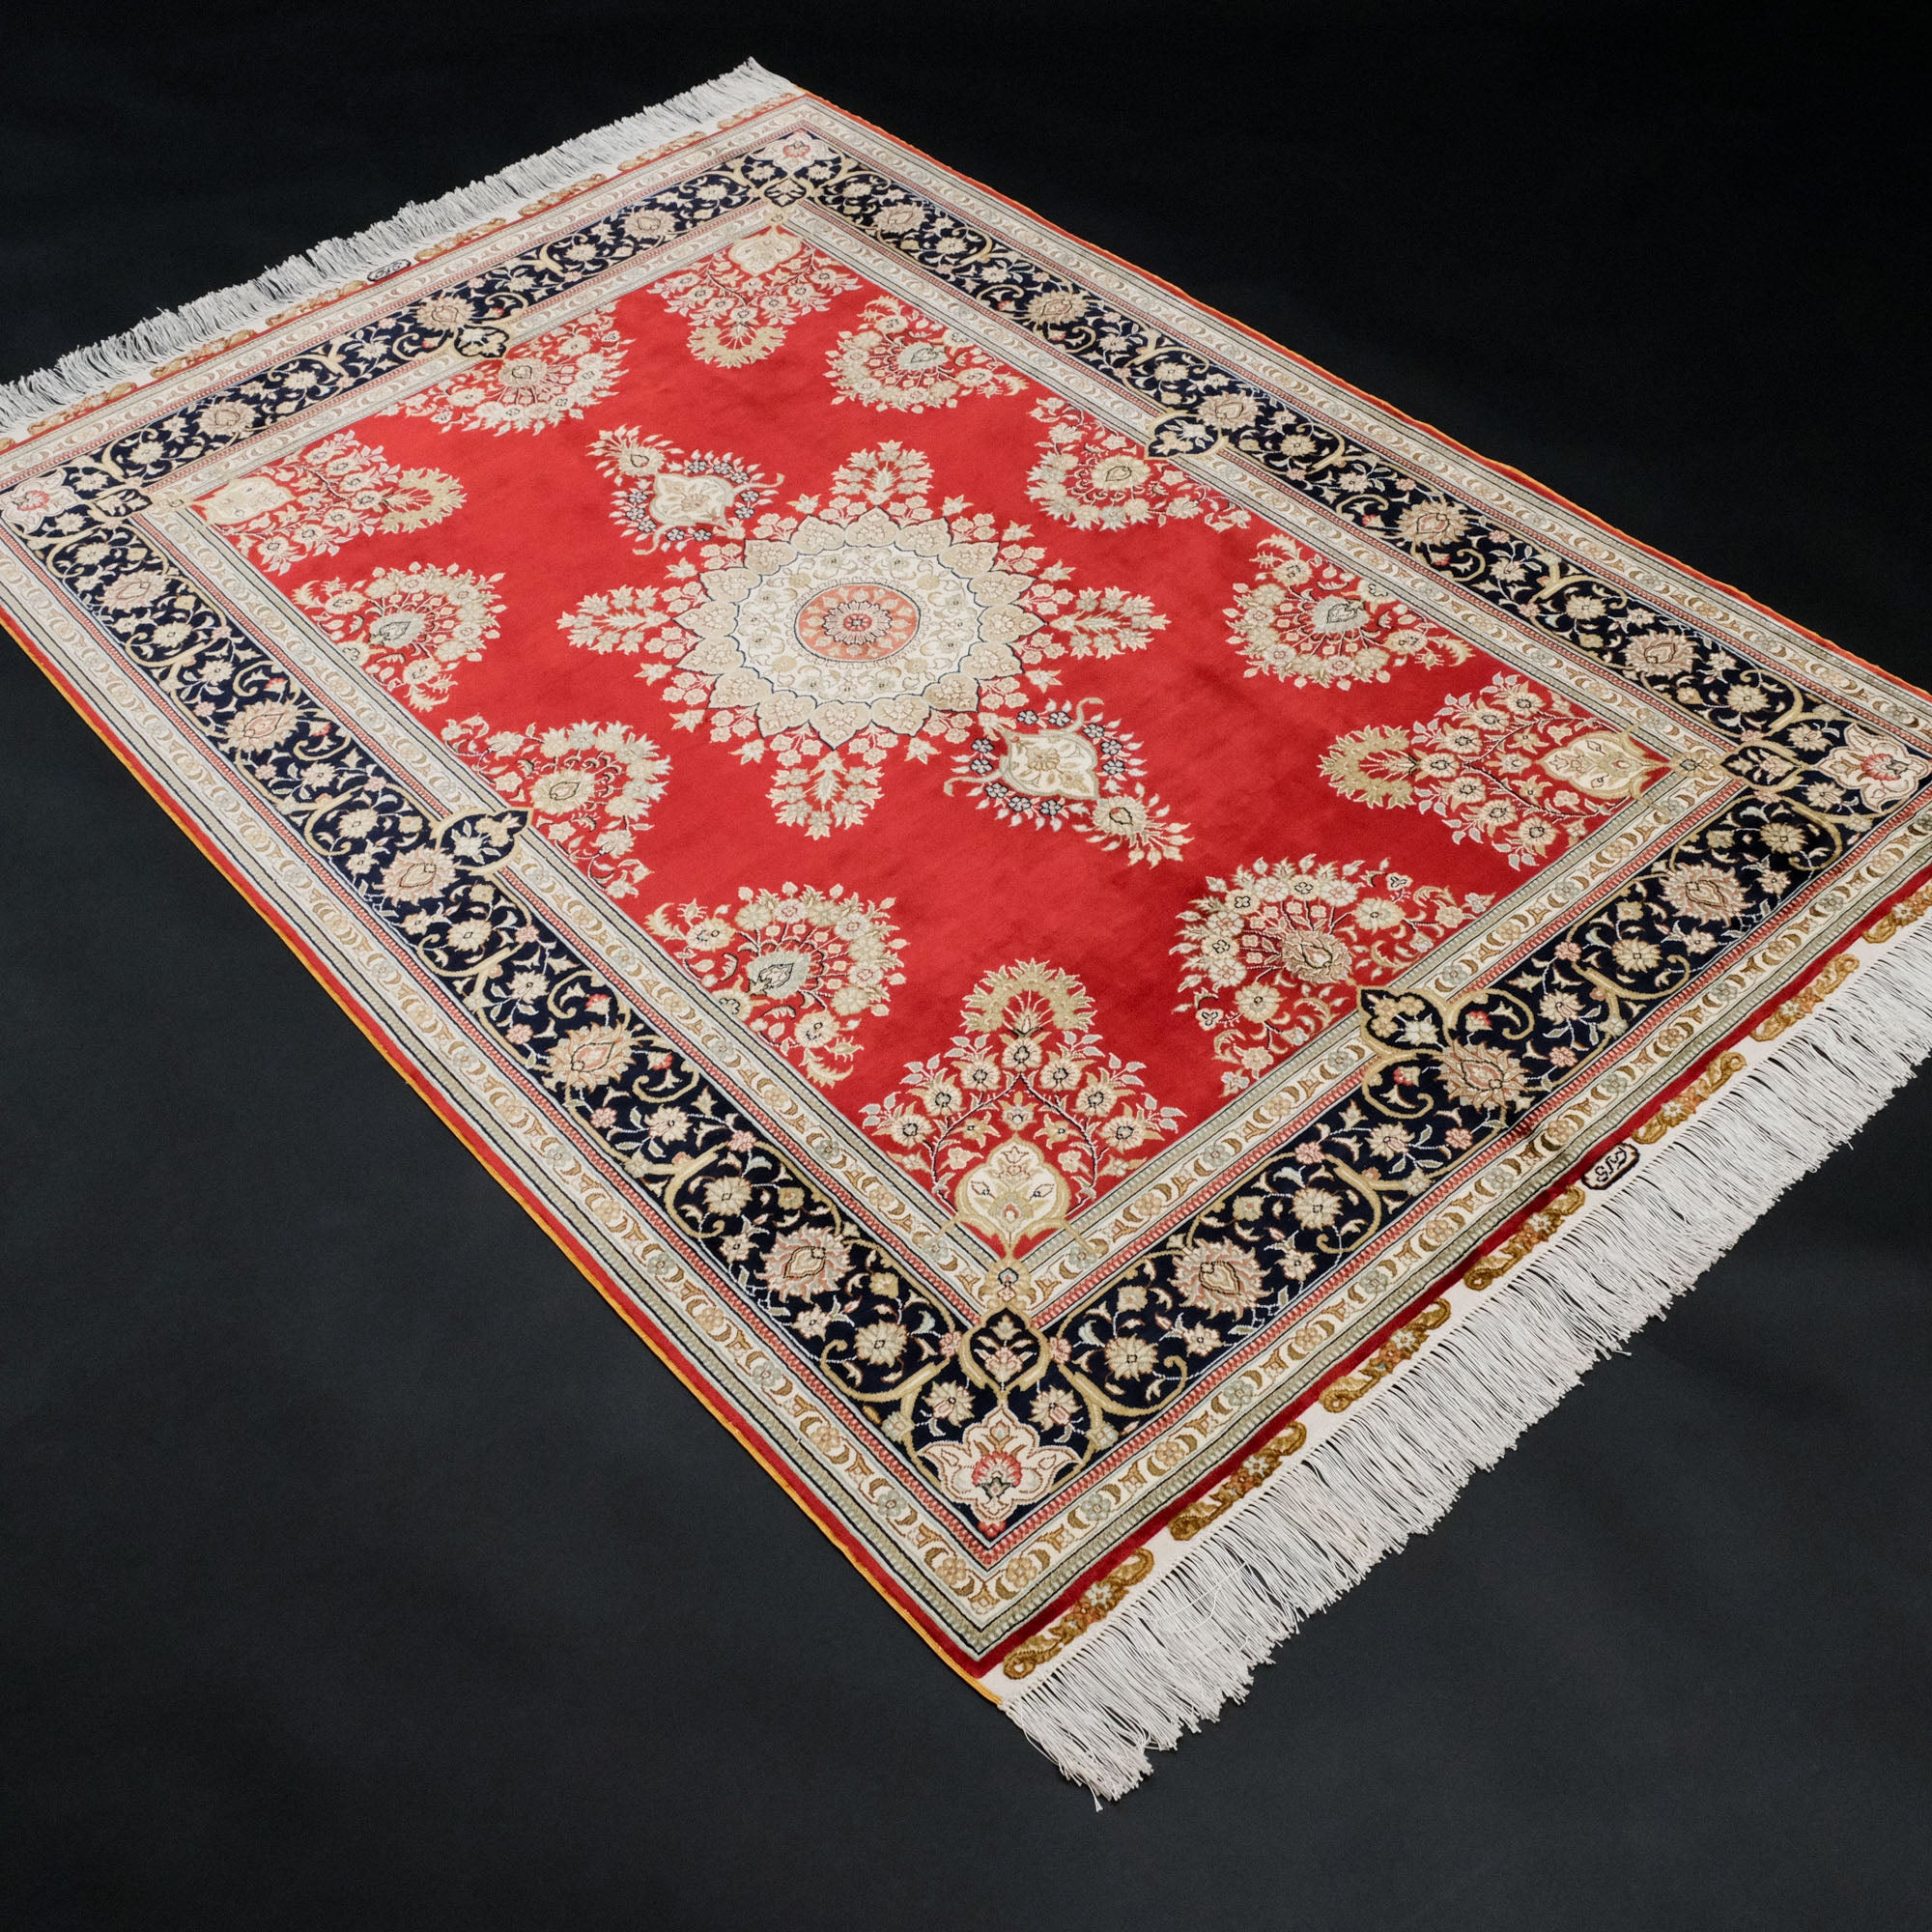 Hand-Woven Frame Patterned Red Carpet